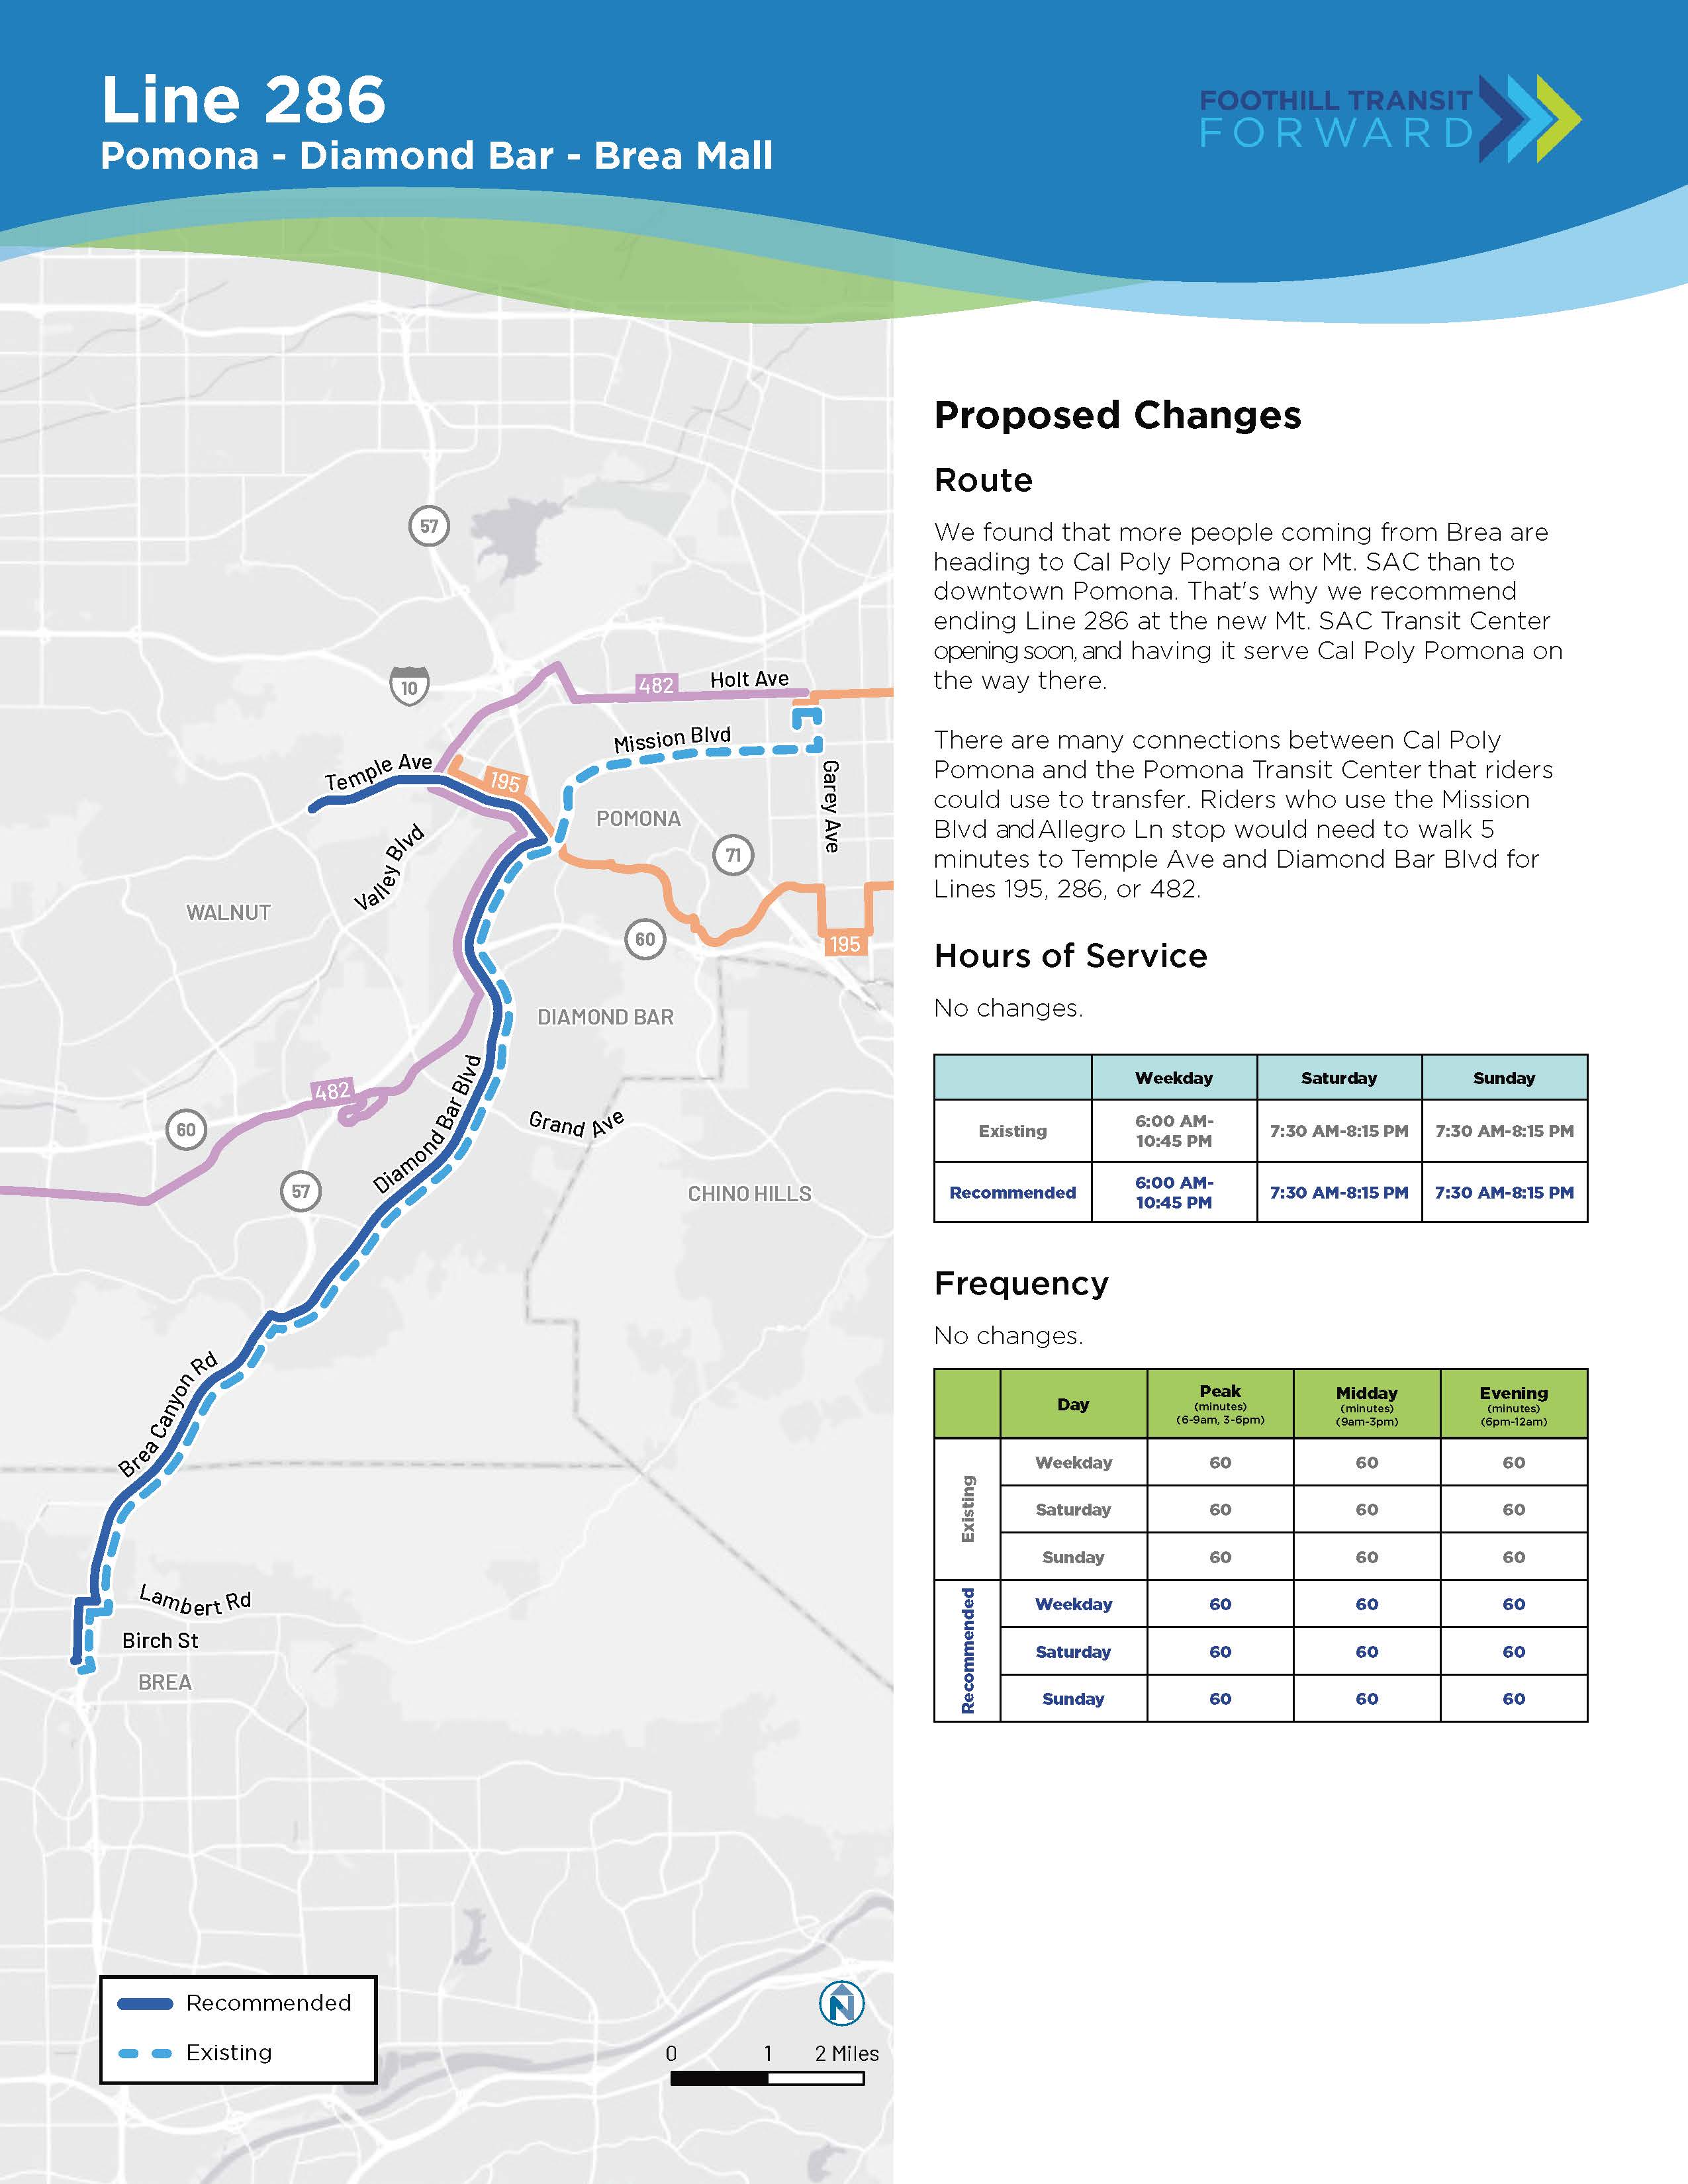 Proposed Changes: Route: We found that more people coming from Brea are heading to Cal Poly Pomona or Mt. SAC than to downtown Pomona. That's why we recommend ending Line 286 at the new Mt. SAC Transit Center opening soon, and having it serve Cal Poly Pomona on the way there. Riders could transfer to service between CPP and the Pomona Transit Center. Riders who use Mission/Allegro would need to walk 5 minutes to Temple/Diamond Bar for Lines 195, 286, or 482. Hours of Service and Frequency: No changes.